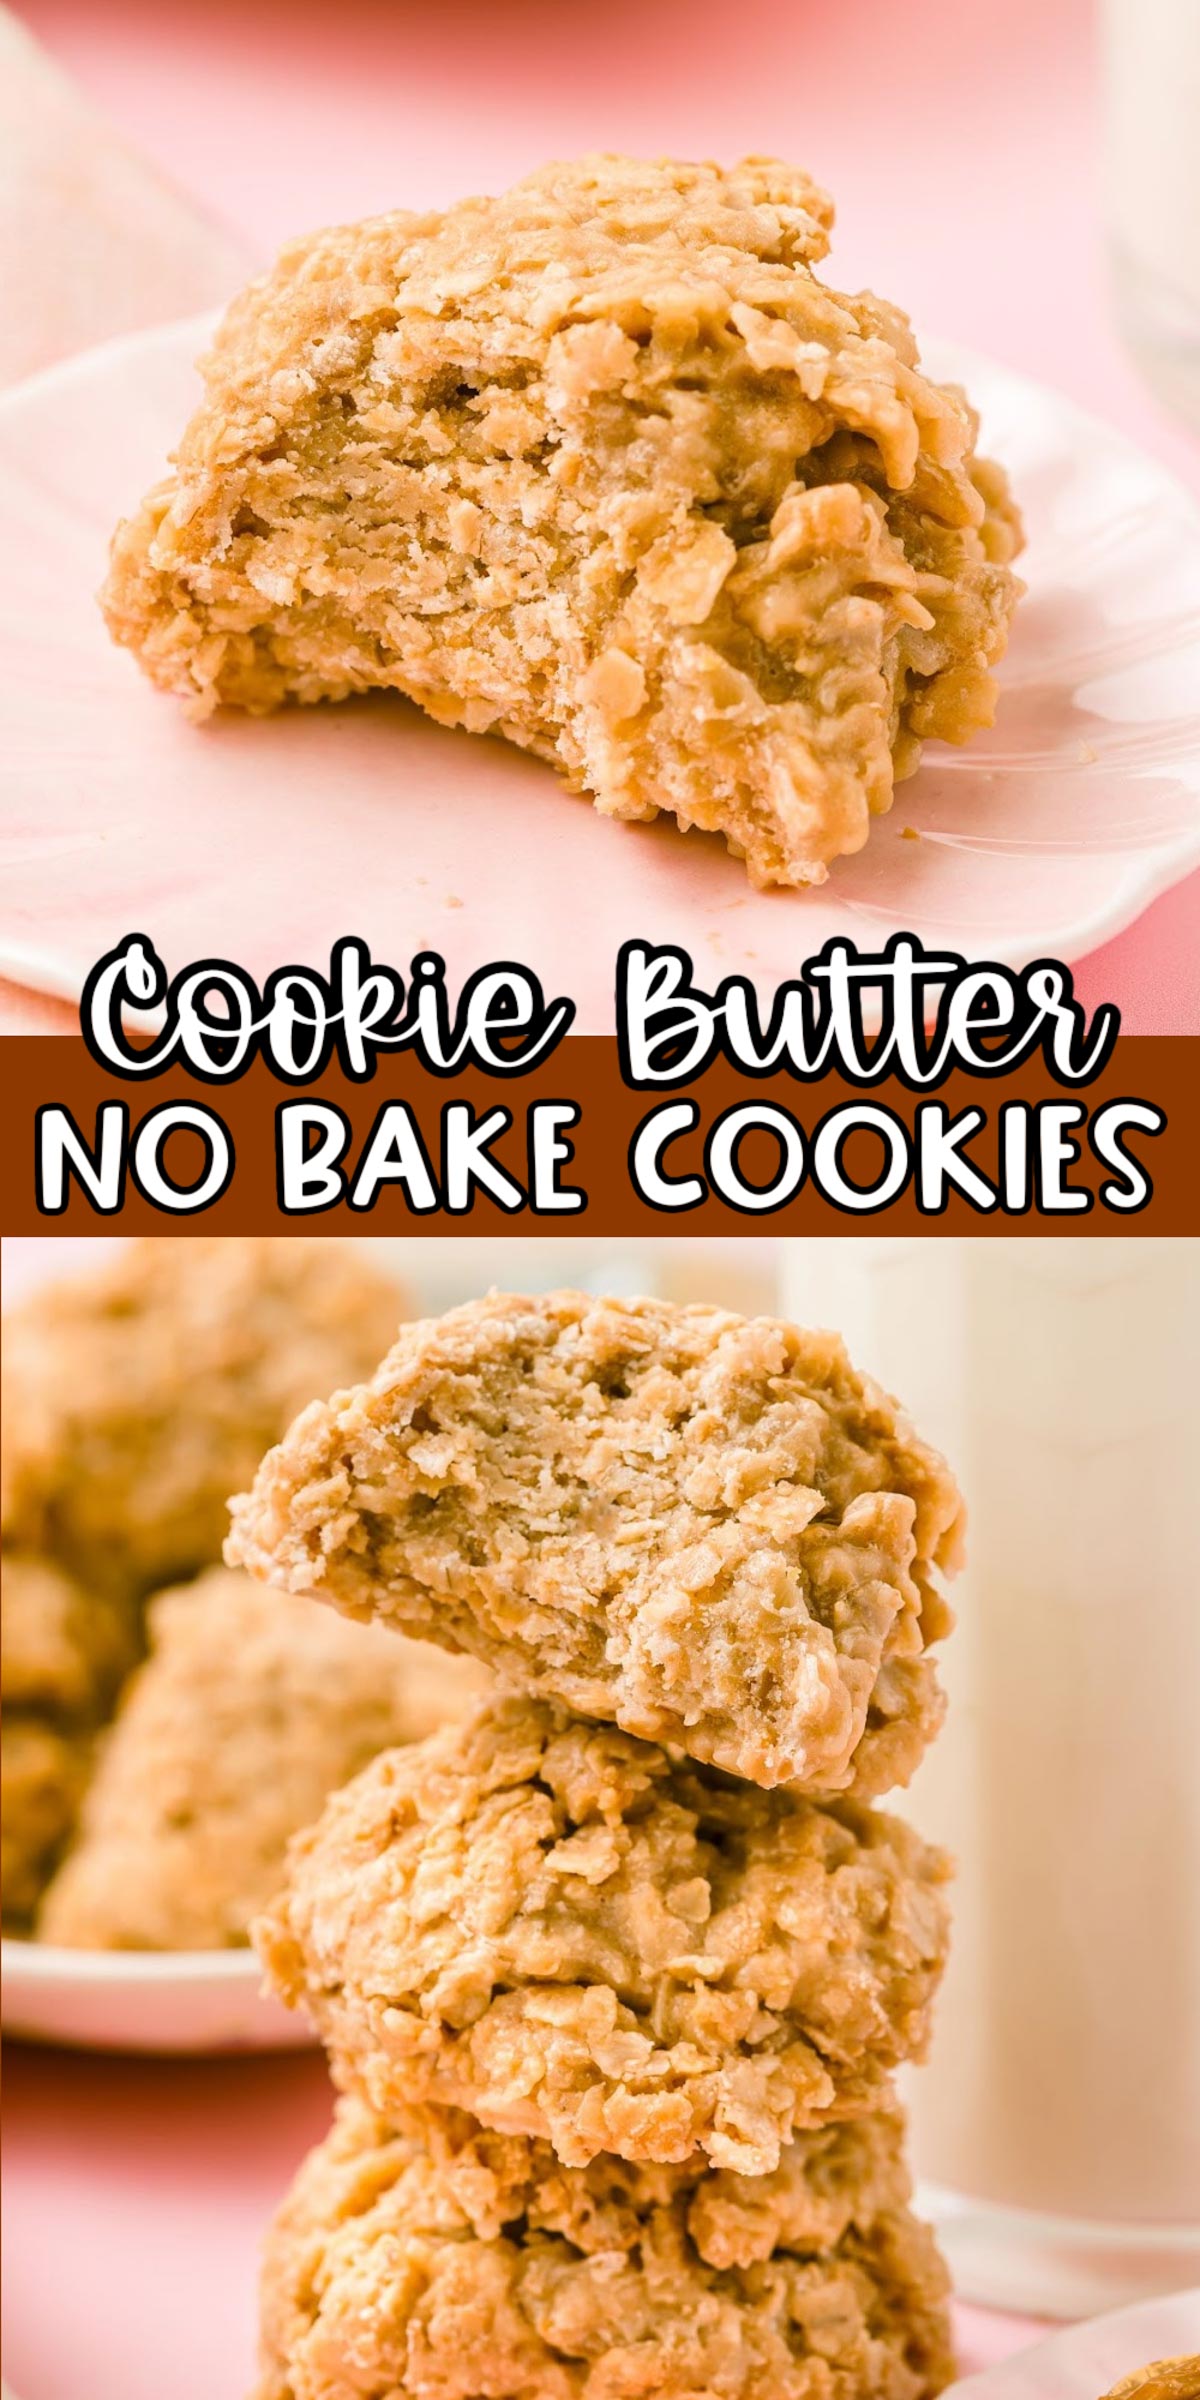 These Cookie Butter No Bake Cookies are a fun twist on the classic recipe that we all grew up with! Made with delicious cookie spread and oatmeal! via @sugarandsoulco